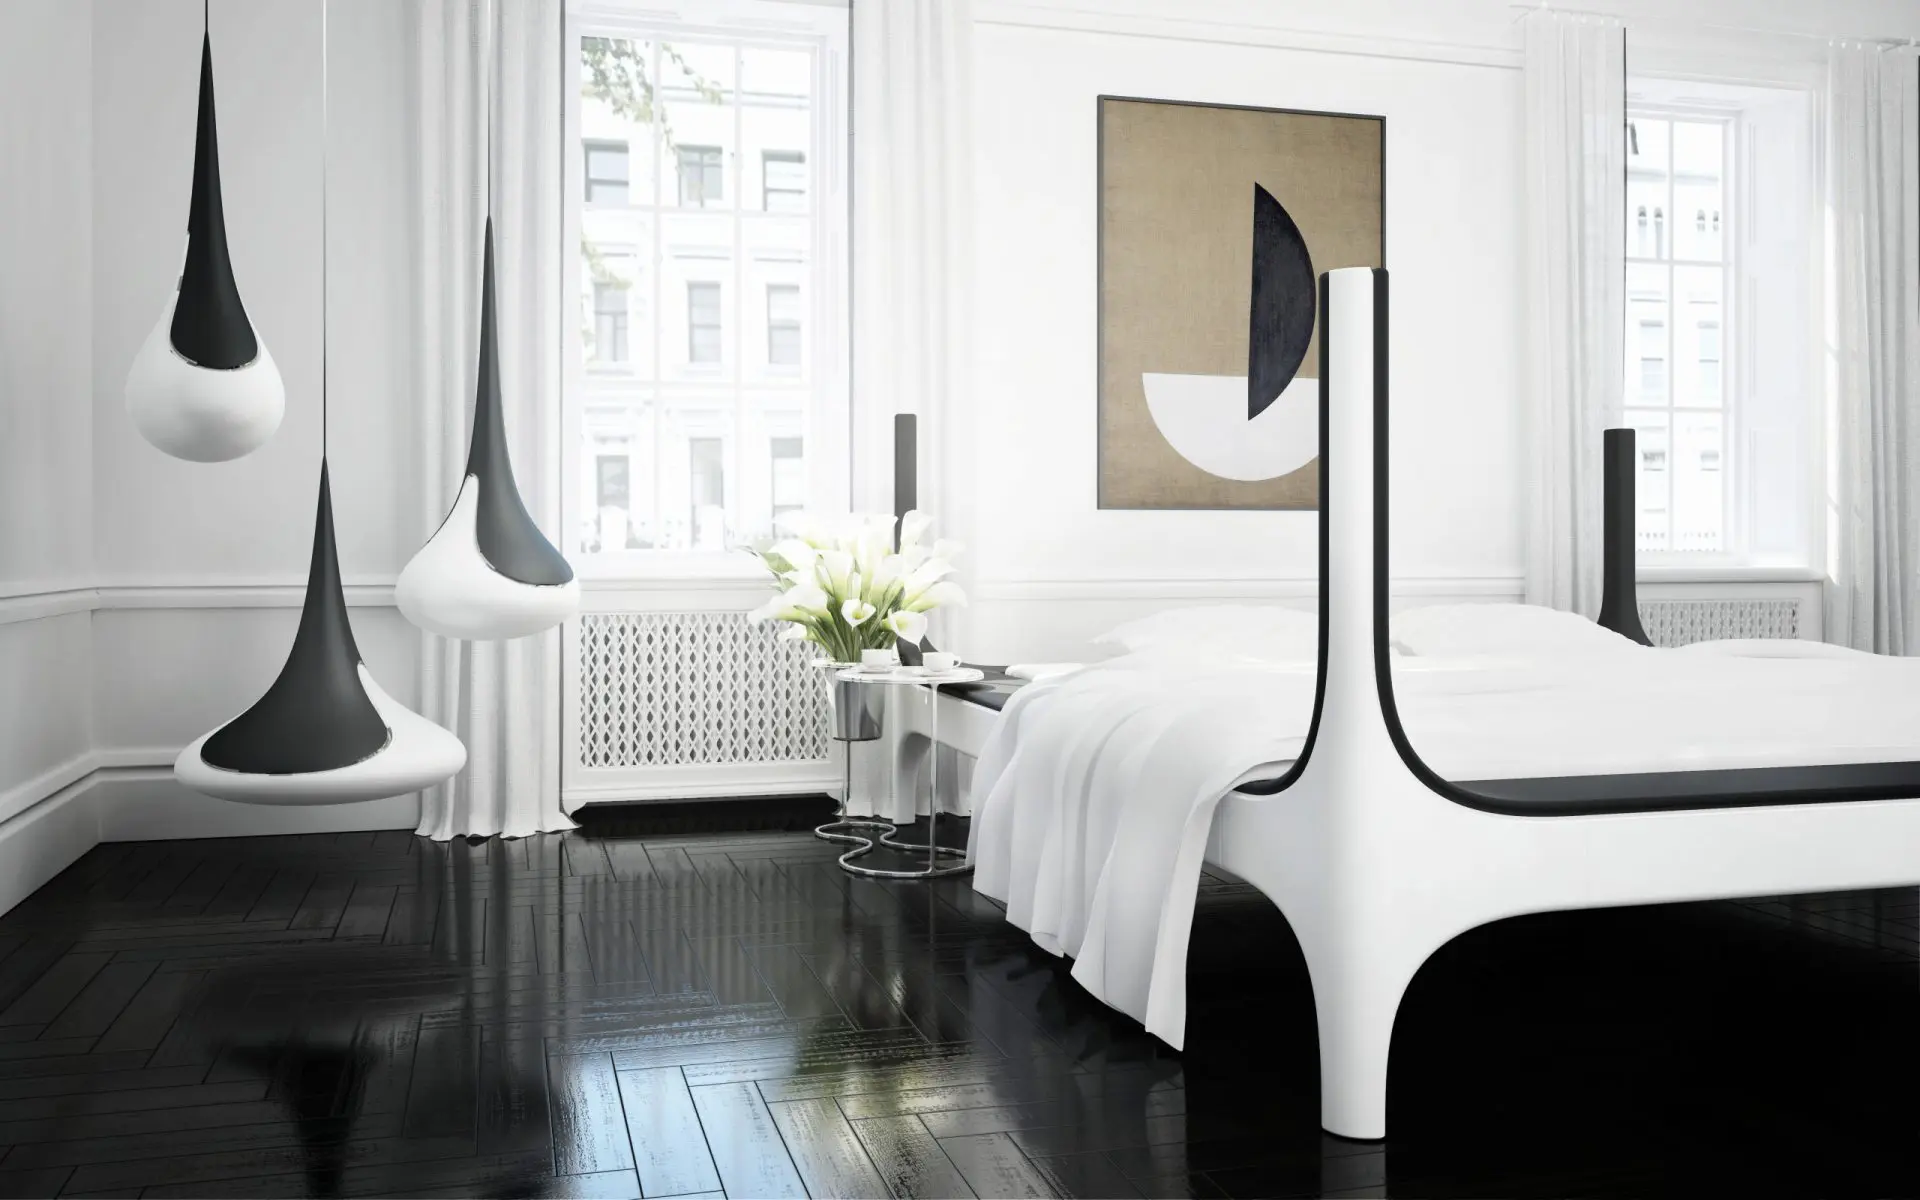 Four poster bed - Glint by Michael Raymond